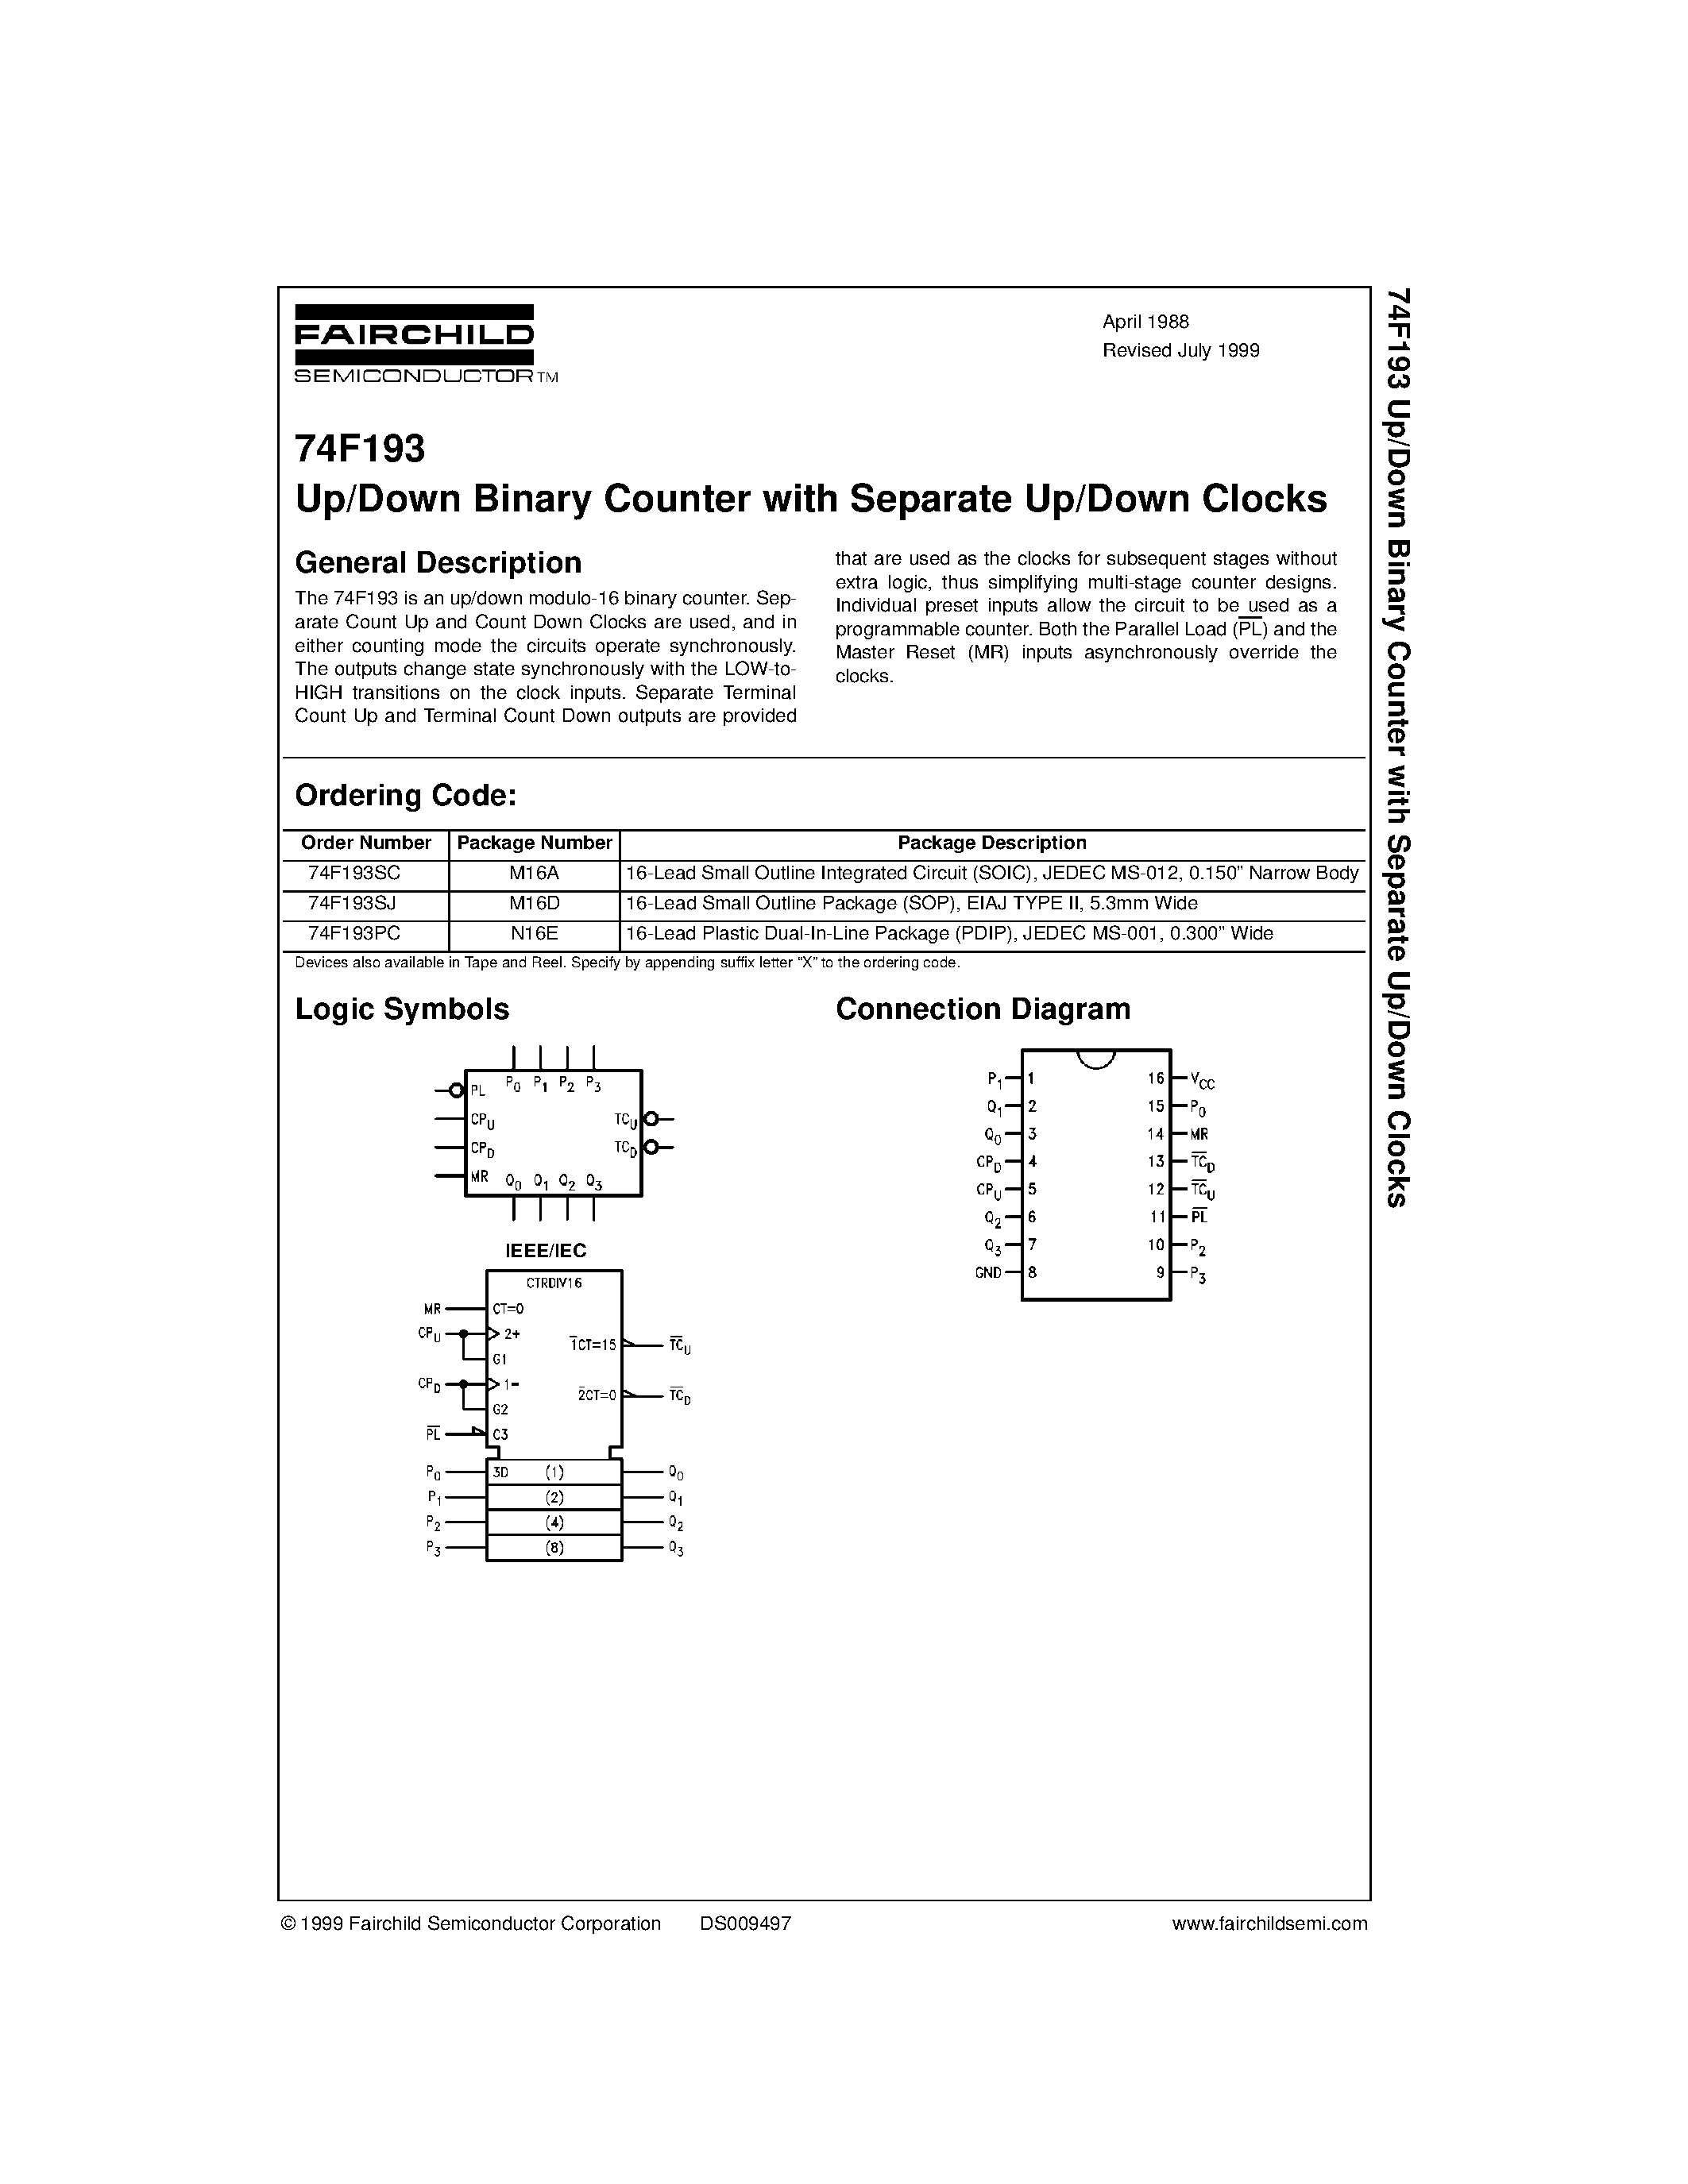 Datasheet 74F193PC - Up/Down Binary Counter with Separate Up/Down Clocks page 1